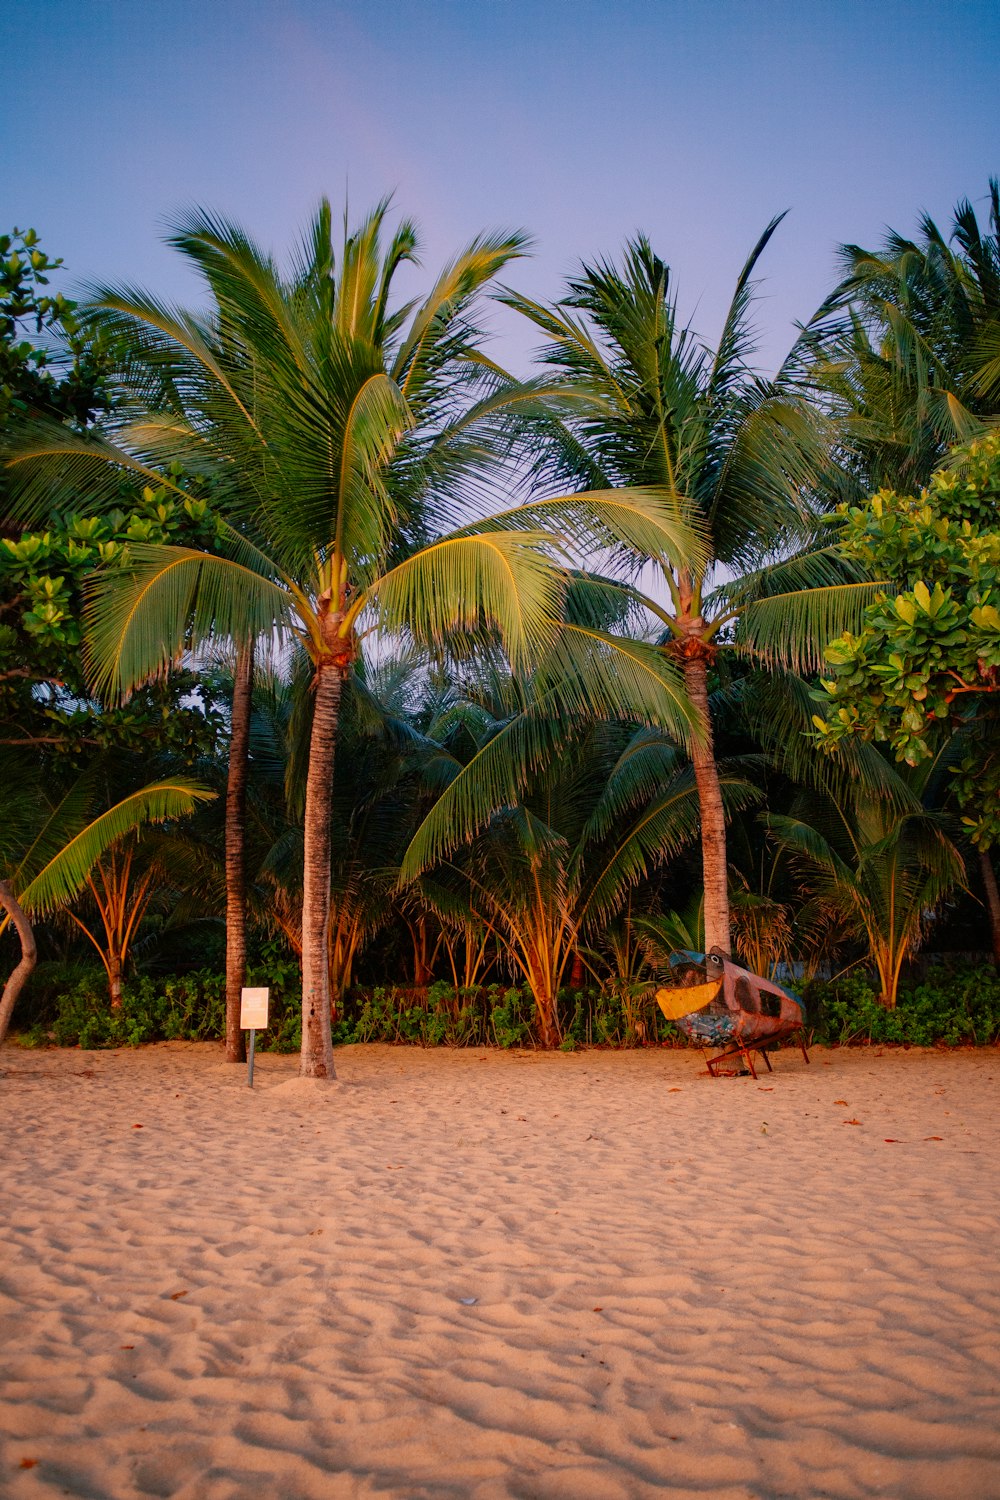 a man sitting on a bench under palm trees